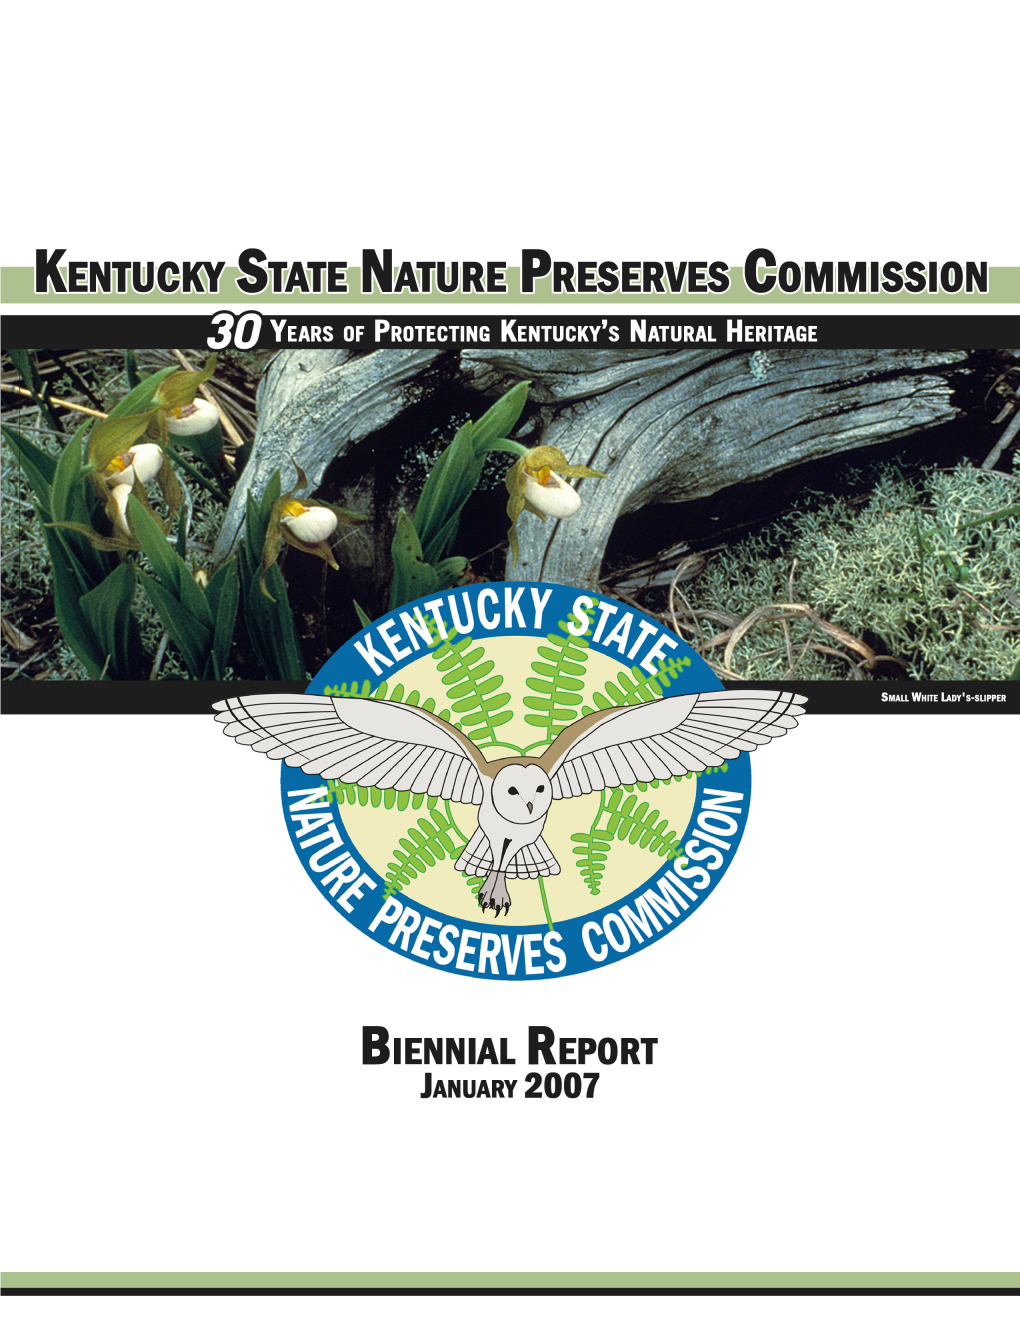 Biennial Report of the Kentucky State Nature Preserves Commission January 2007